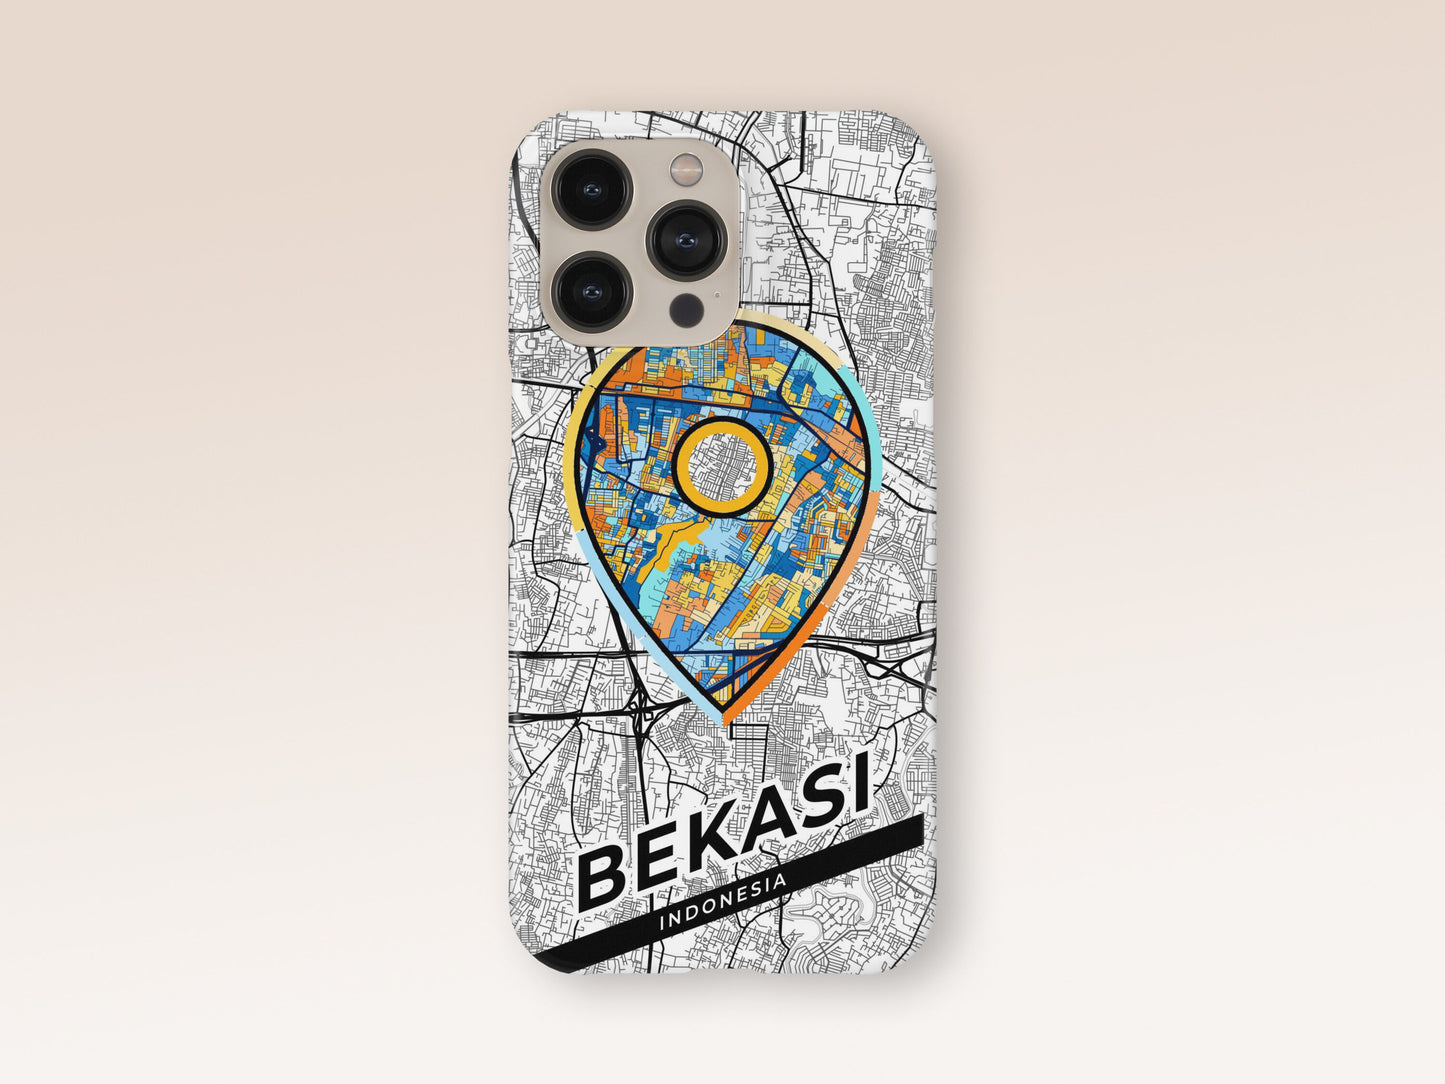 Bekasi Indonesia slim phone case with colorful icon. Birthday, wedding or housewarming gift. Couple match cases. 1